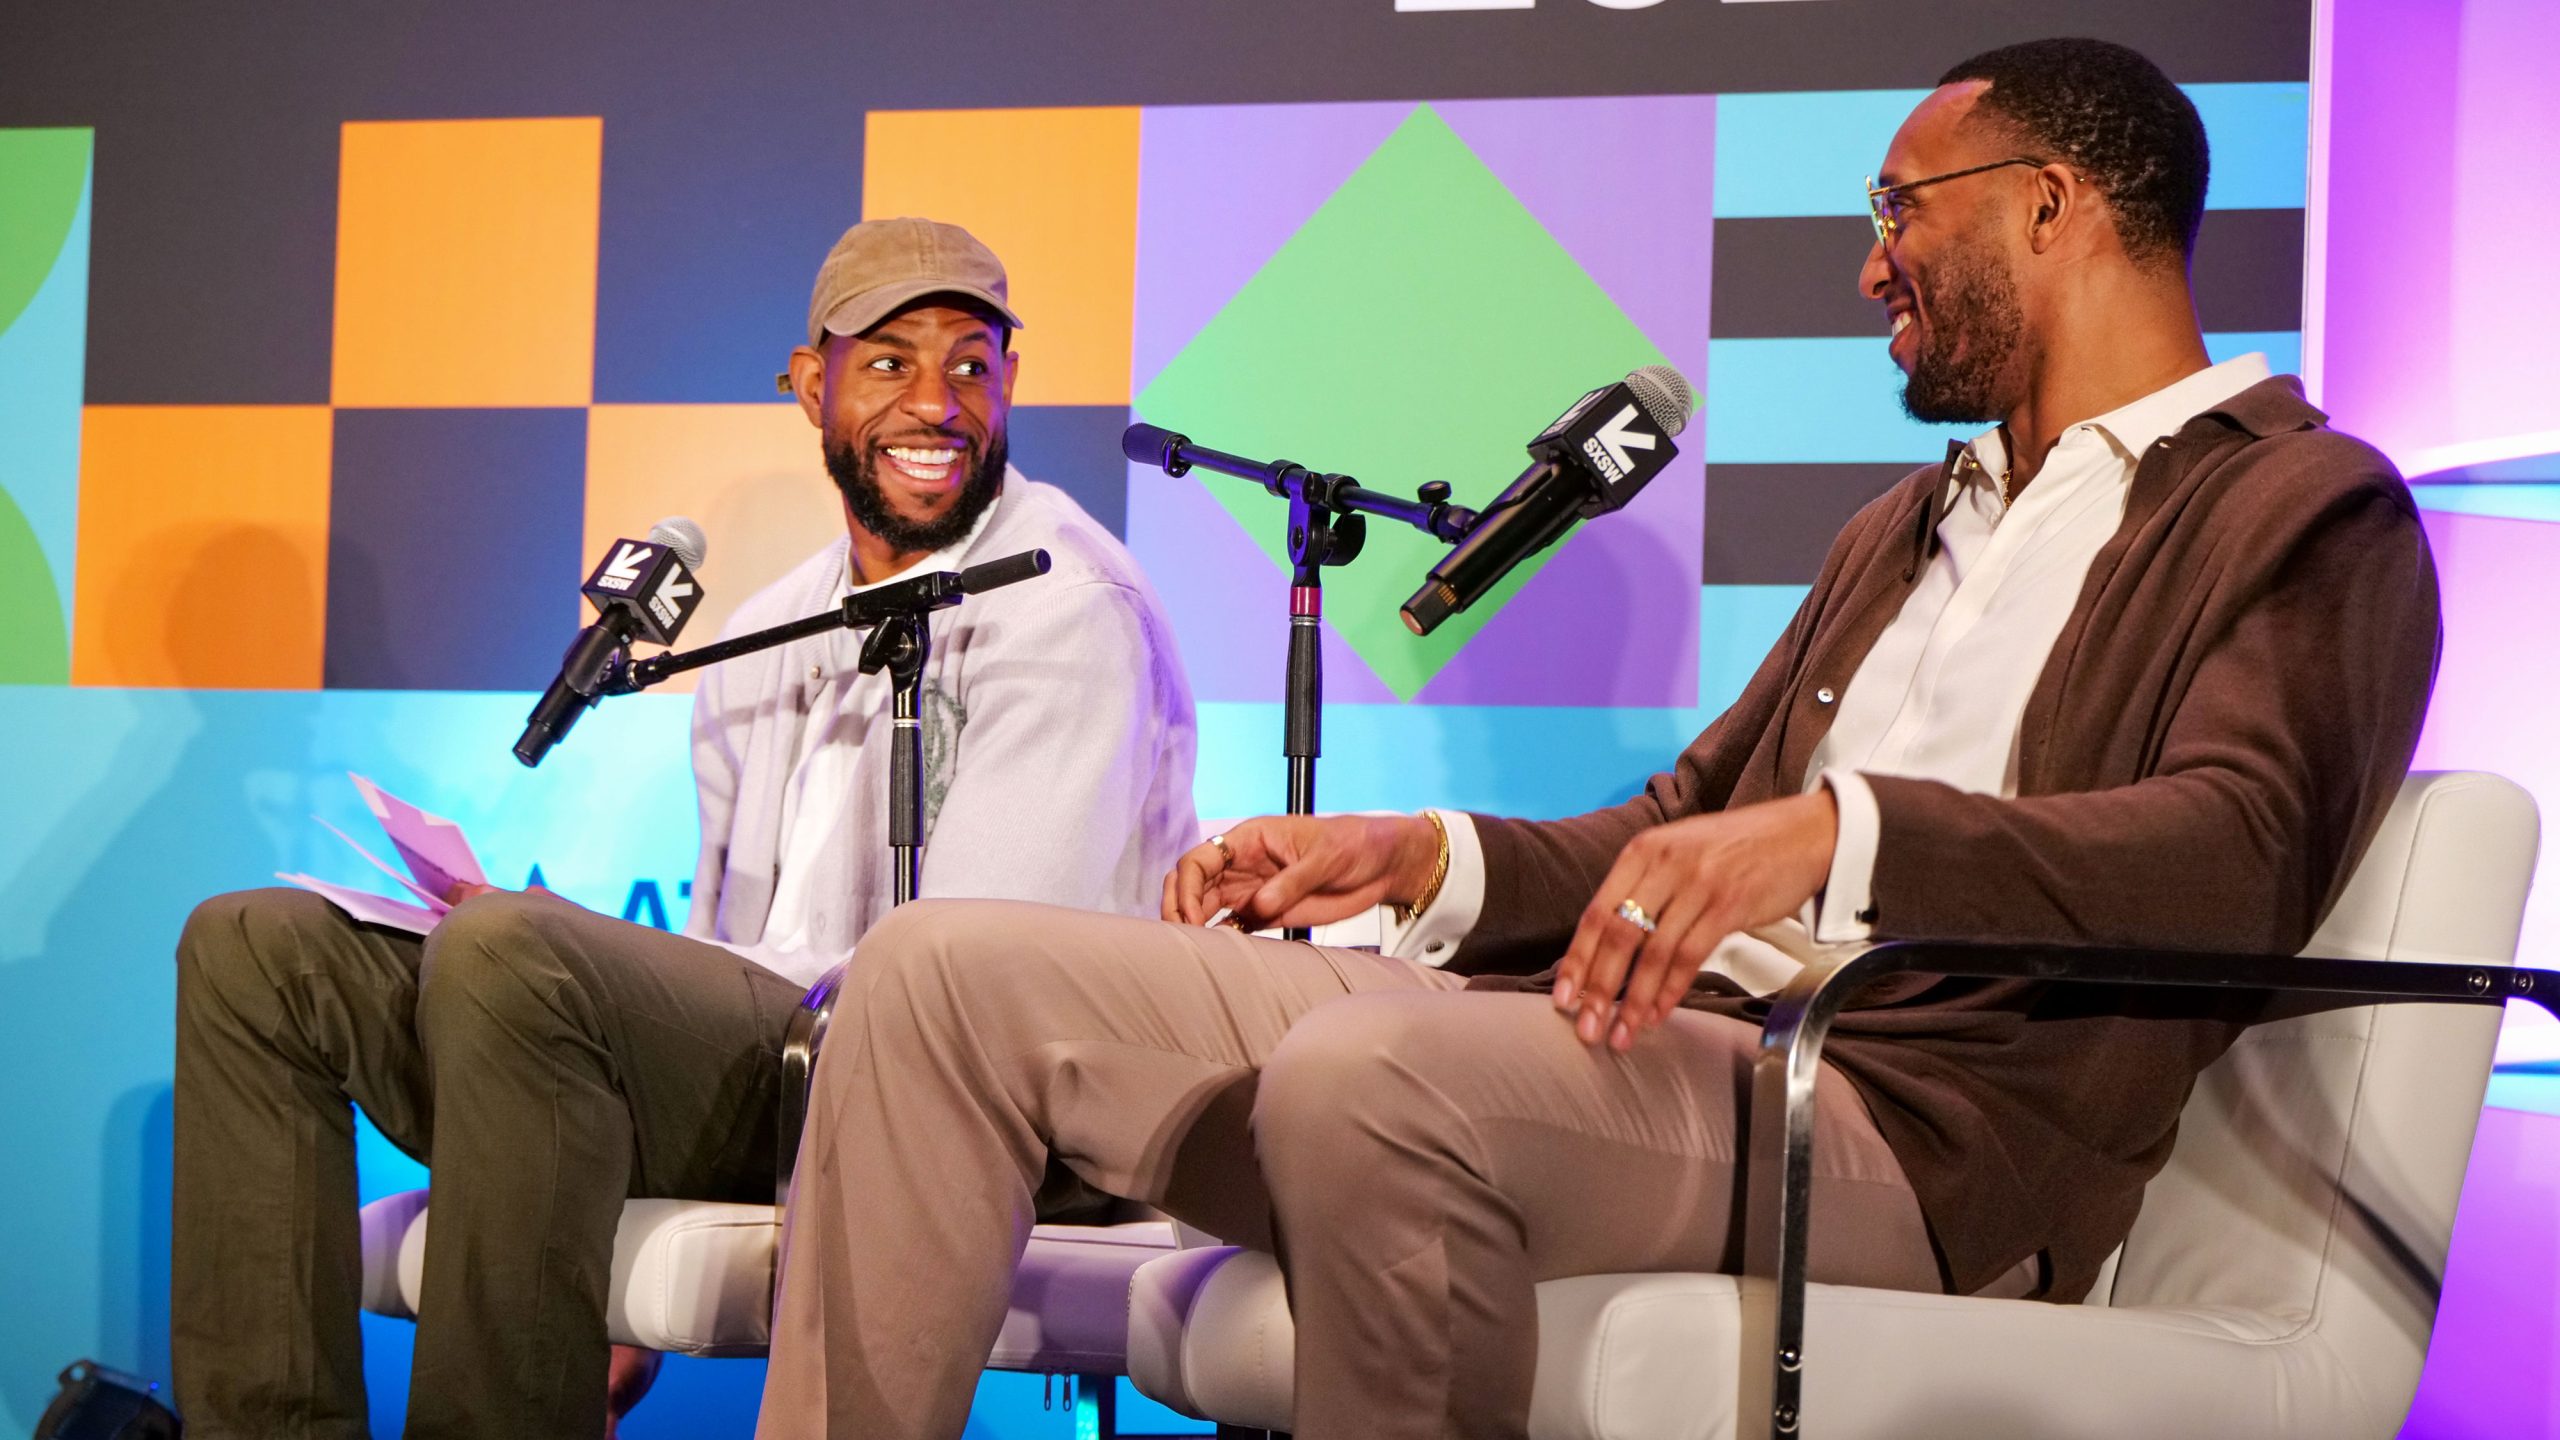 Point Forward, Live with Andre Iguodala and Evan Turner Featuring Megan Rapinoe – Photo by Will Blake